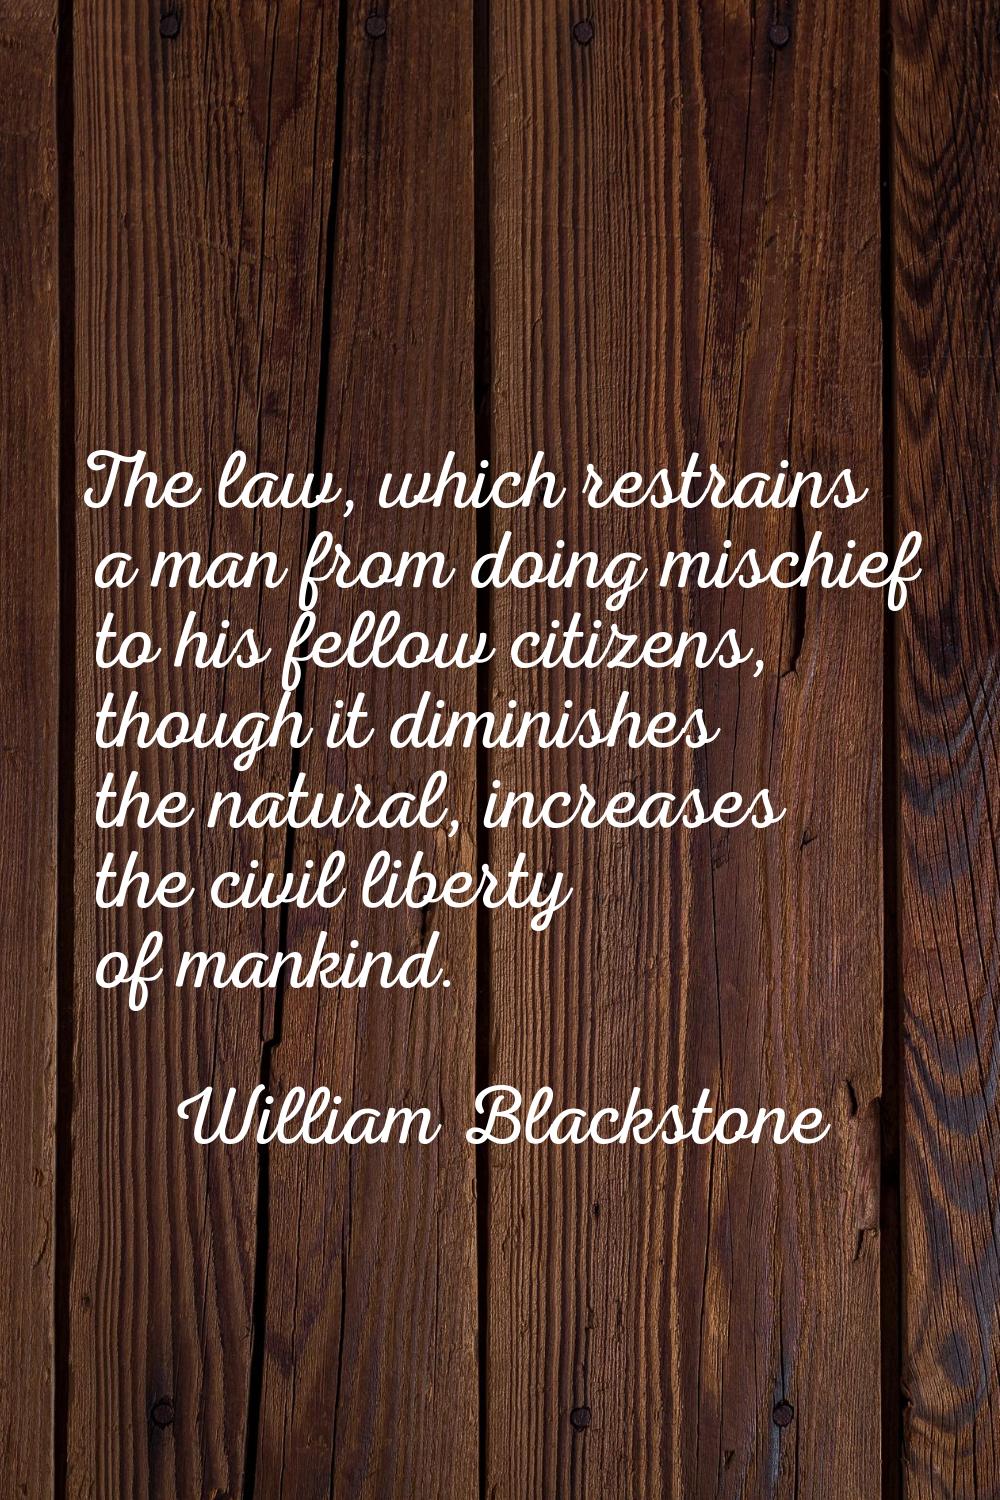 The law, which restrains a man from doing mischief to his fellow citizens, though it diminishes the